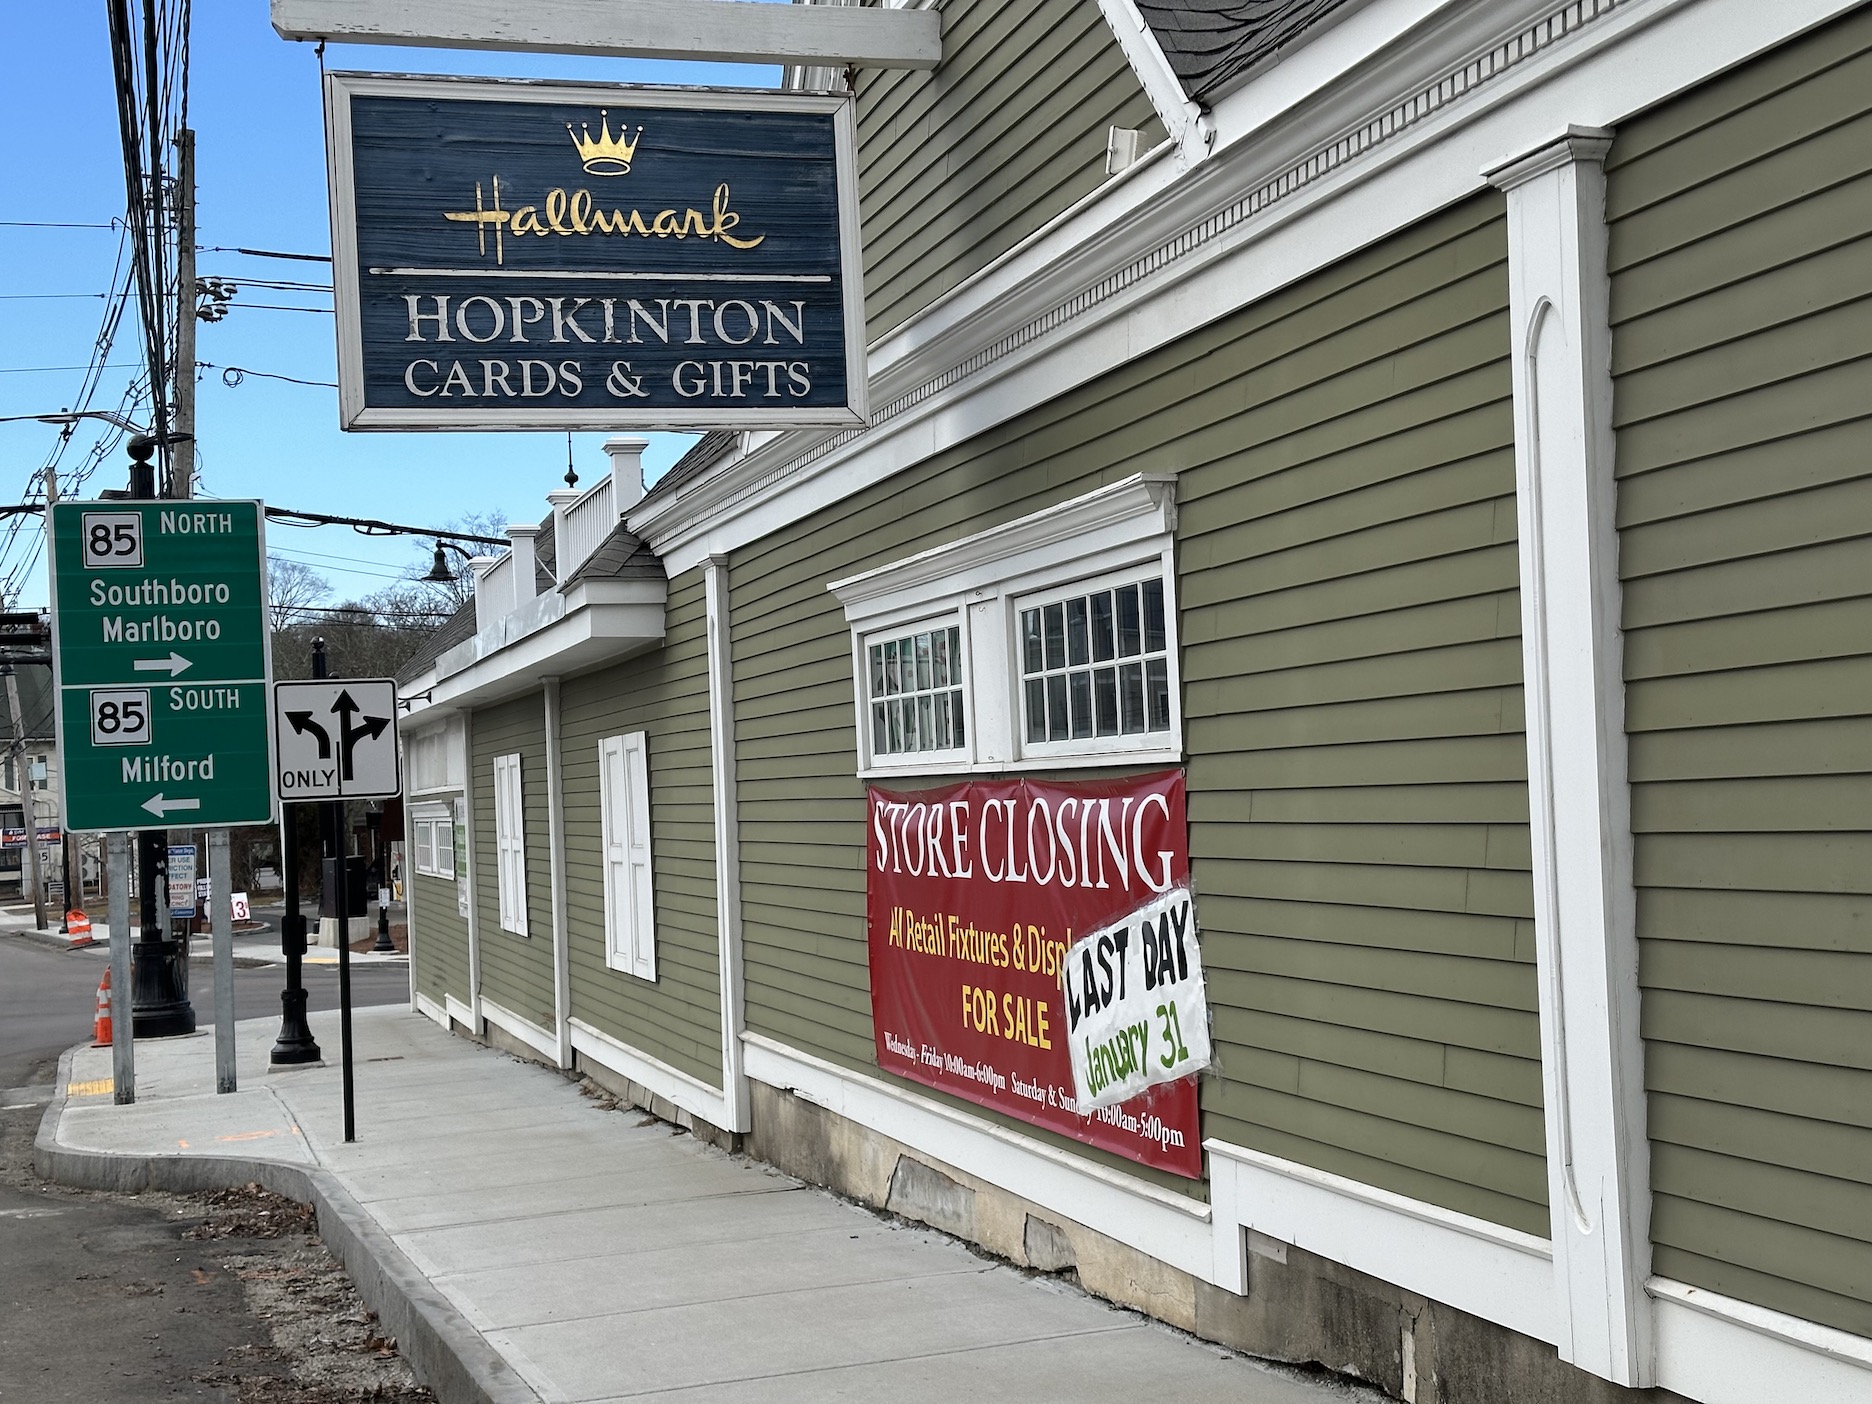 Historical Commission weighs in on Hopkinton Drug property, which is targeted for mixed-use development